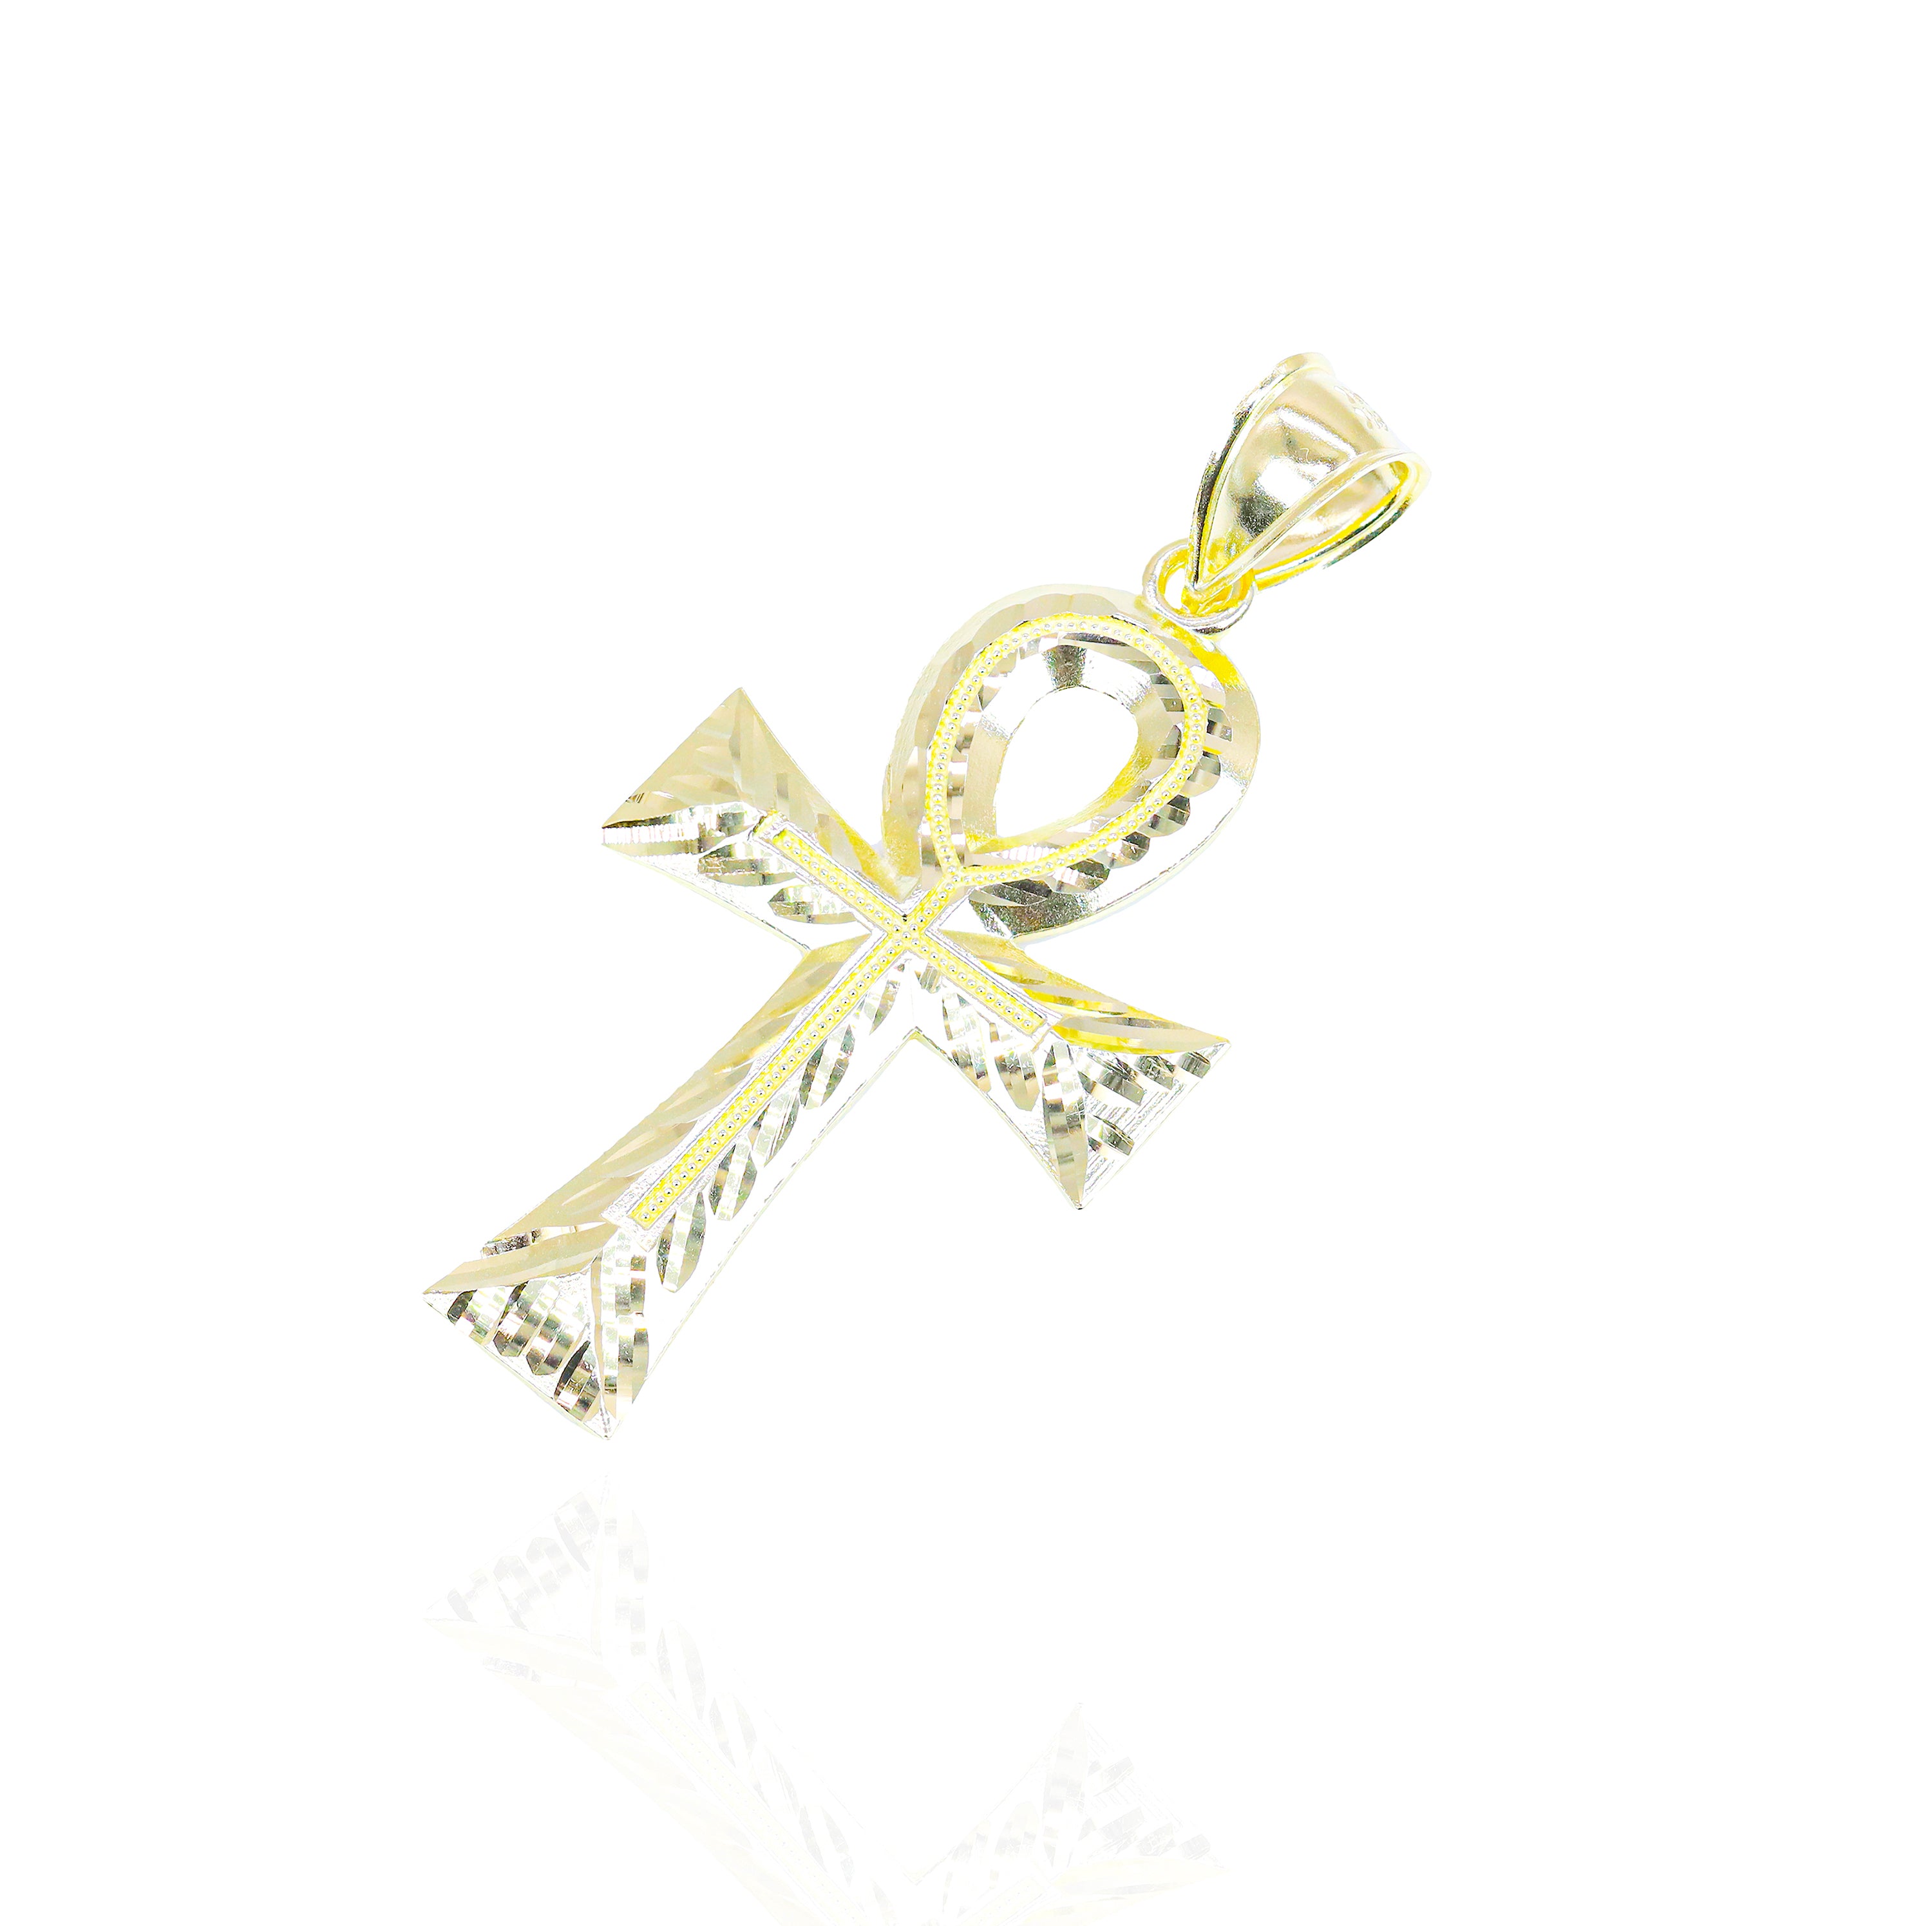 10KT Yellow Gold Small/Large Fluted Ankh Solid Gold Pendant